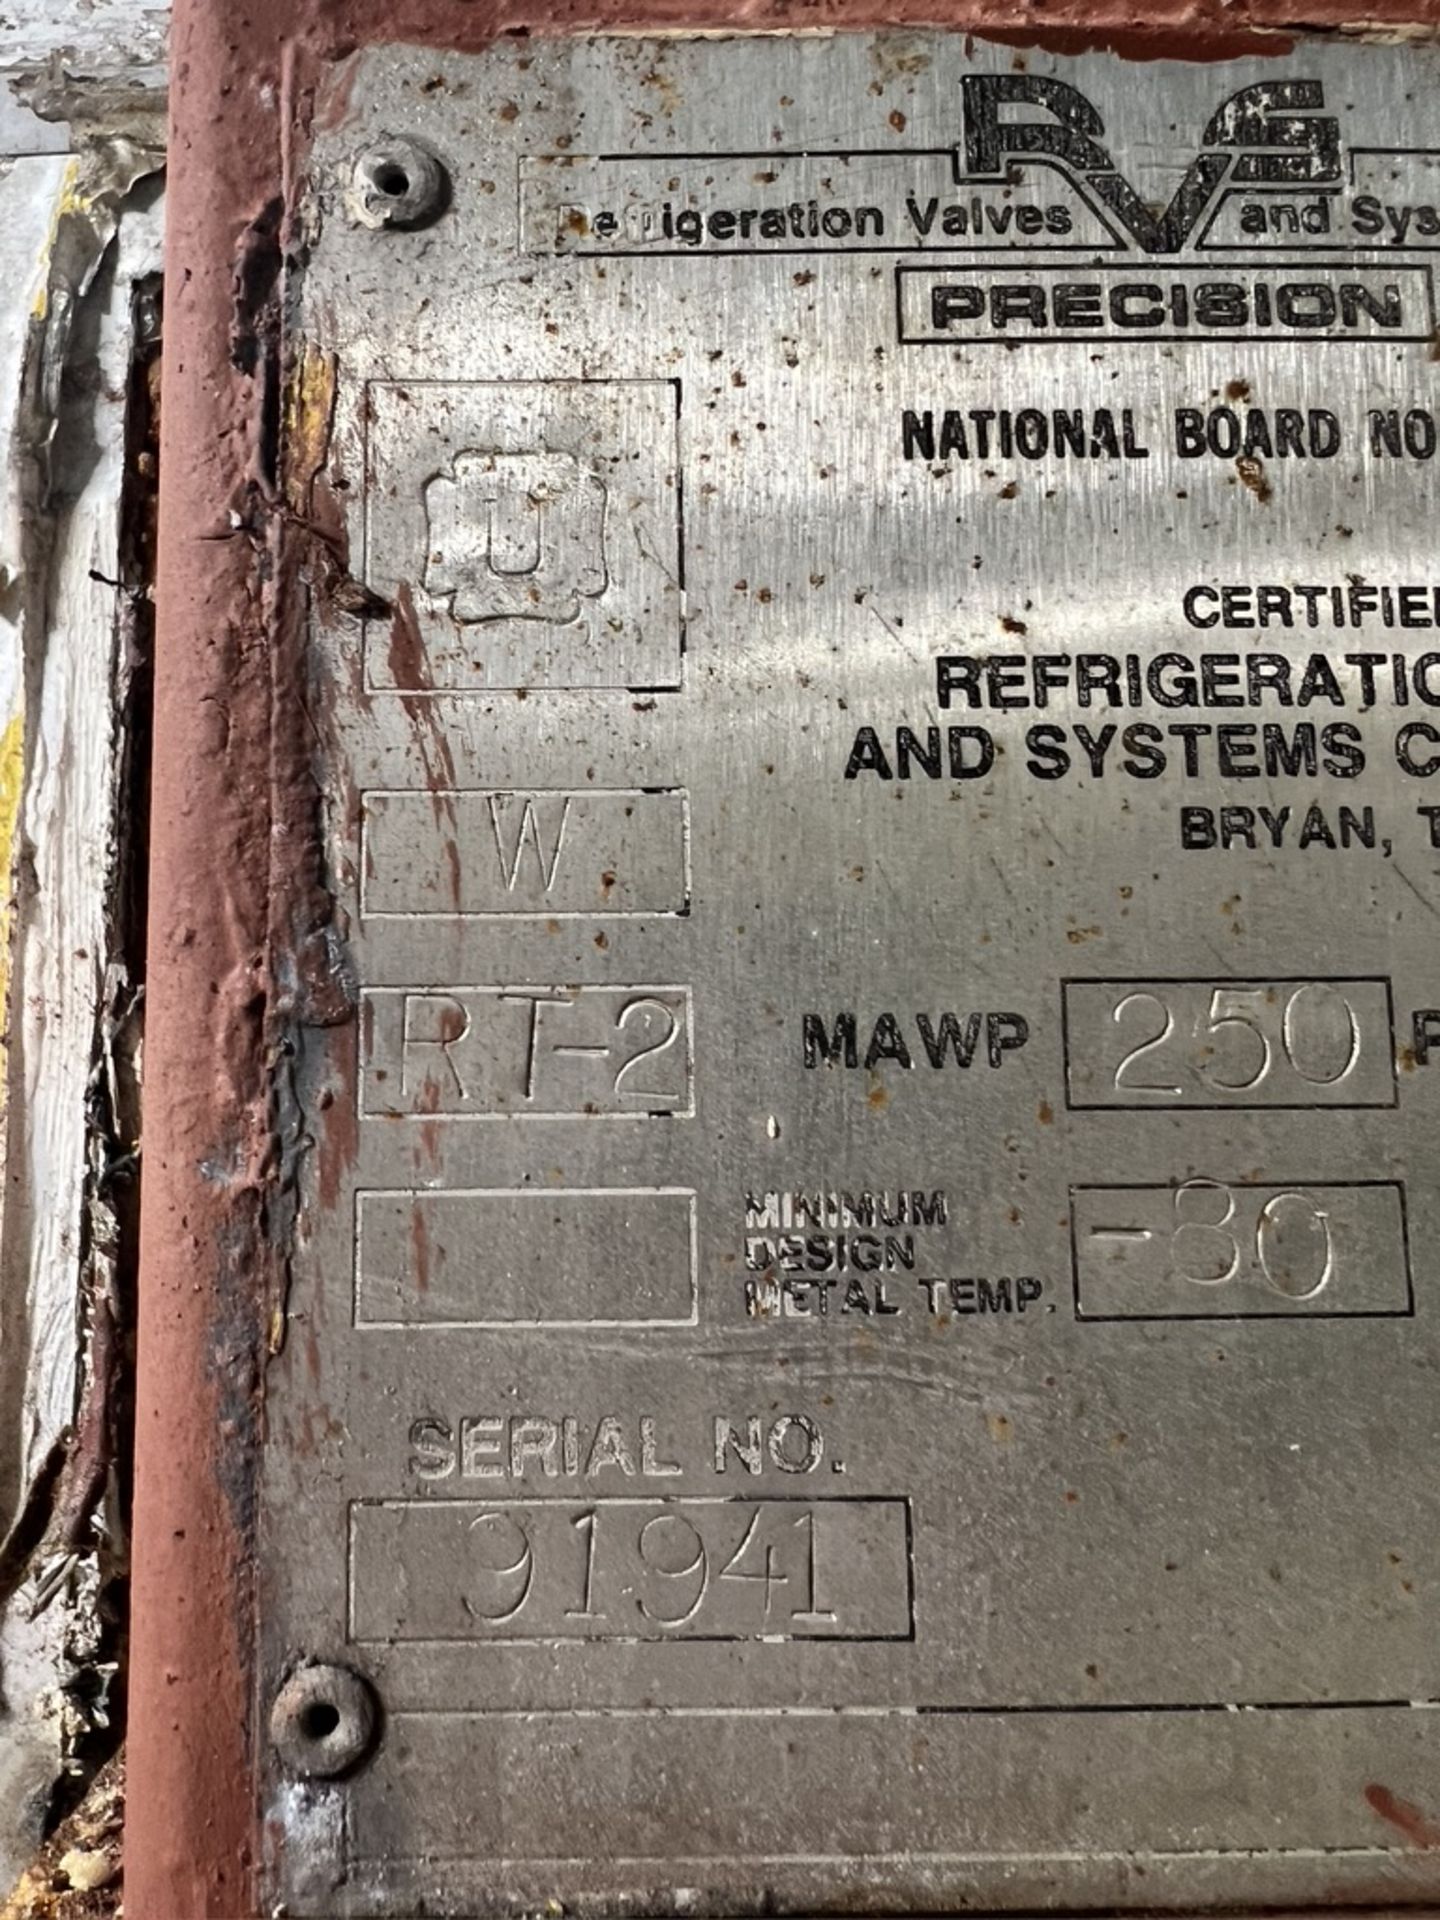 PRECISION AMMONIA SUPPLY TANK, S/N 91941, NATIONAL BOARD NUMBNER 4493, MAWP 250 PSI @ 300 F - Image 10 of 11